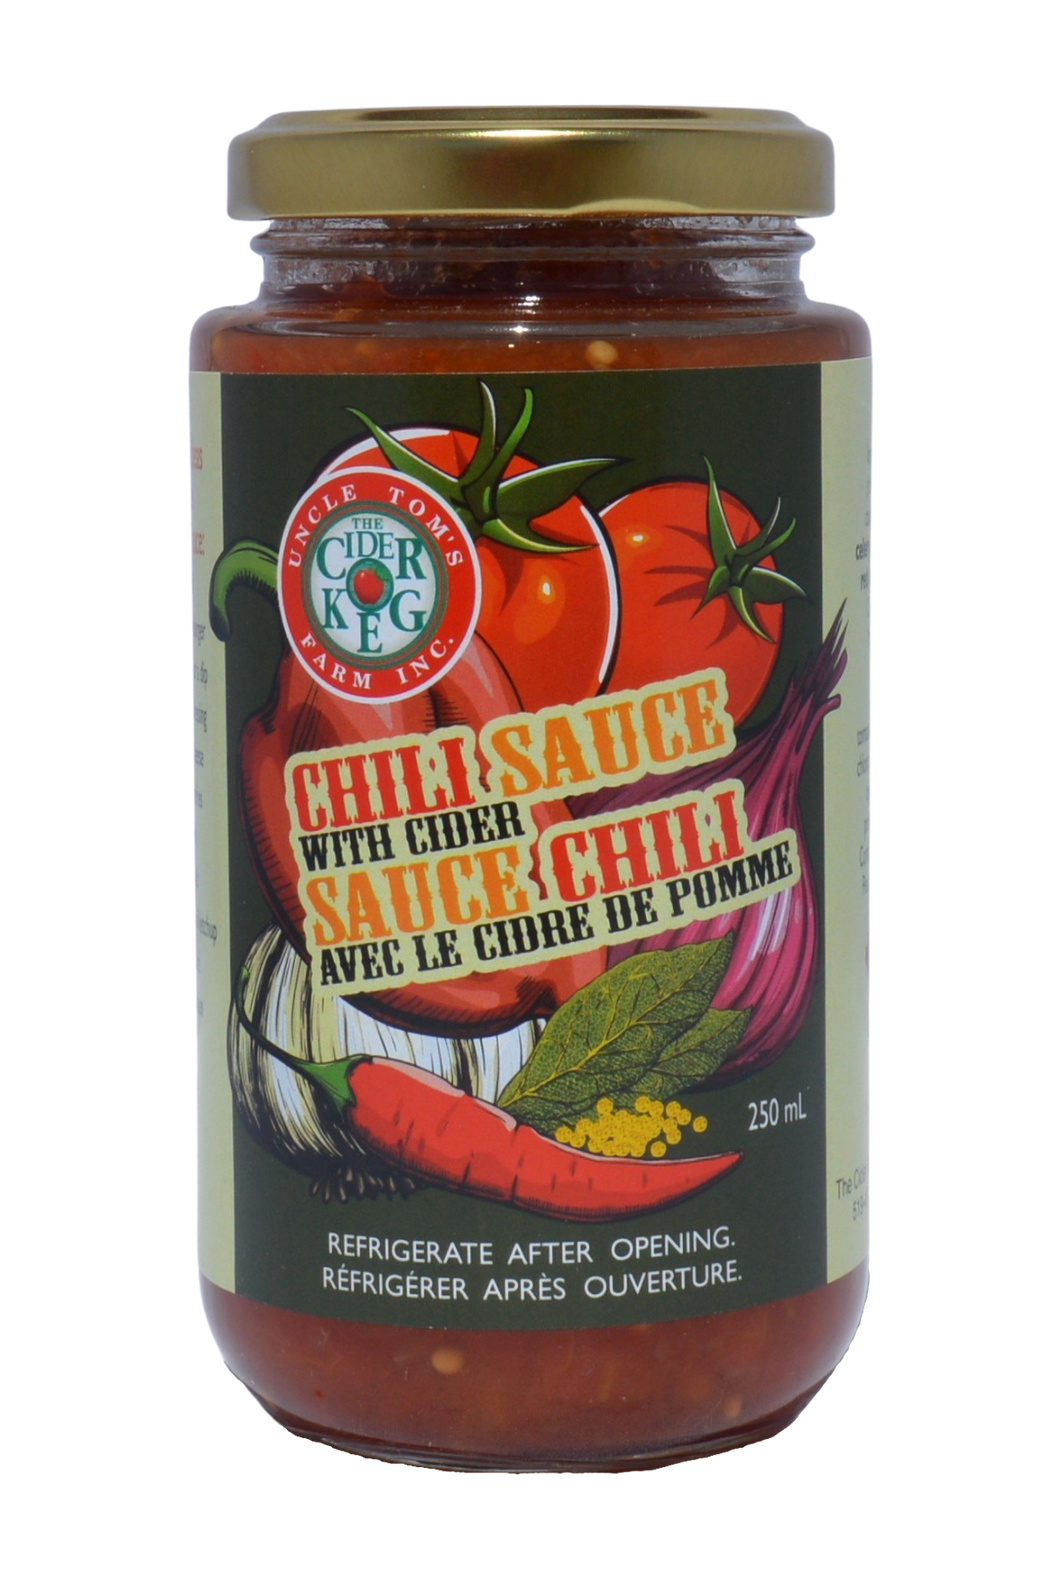 Chilli Sauce with Cider